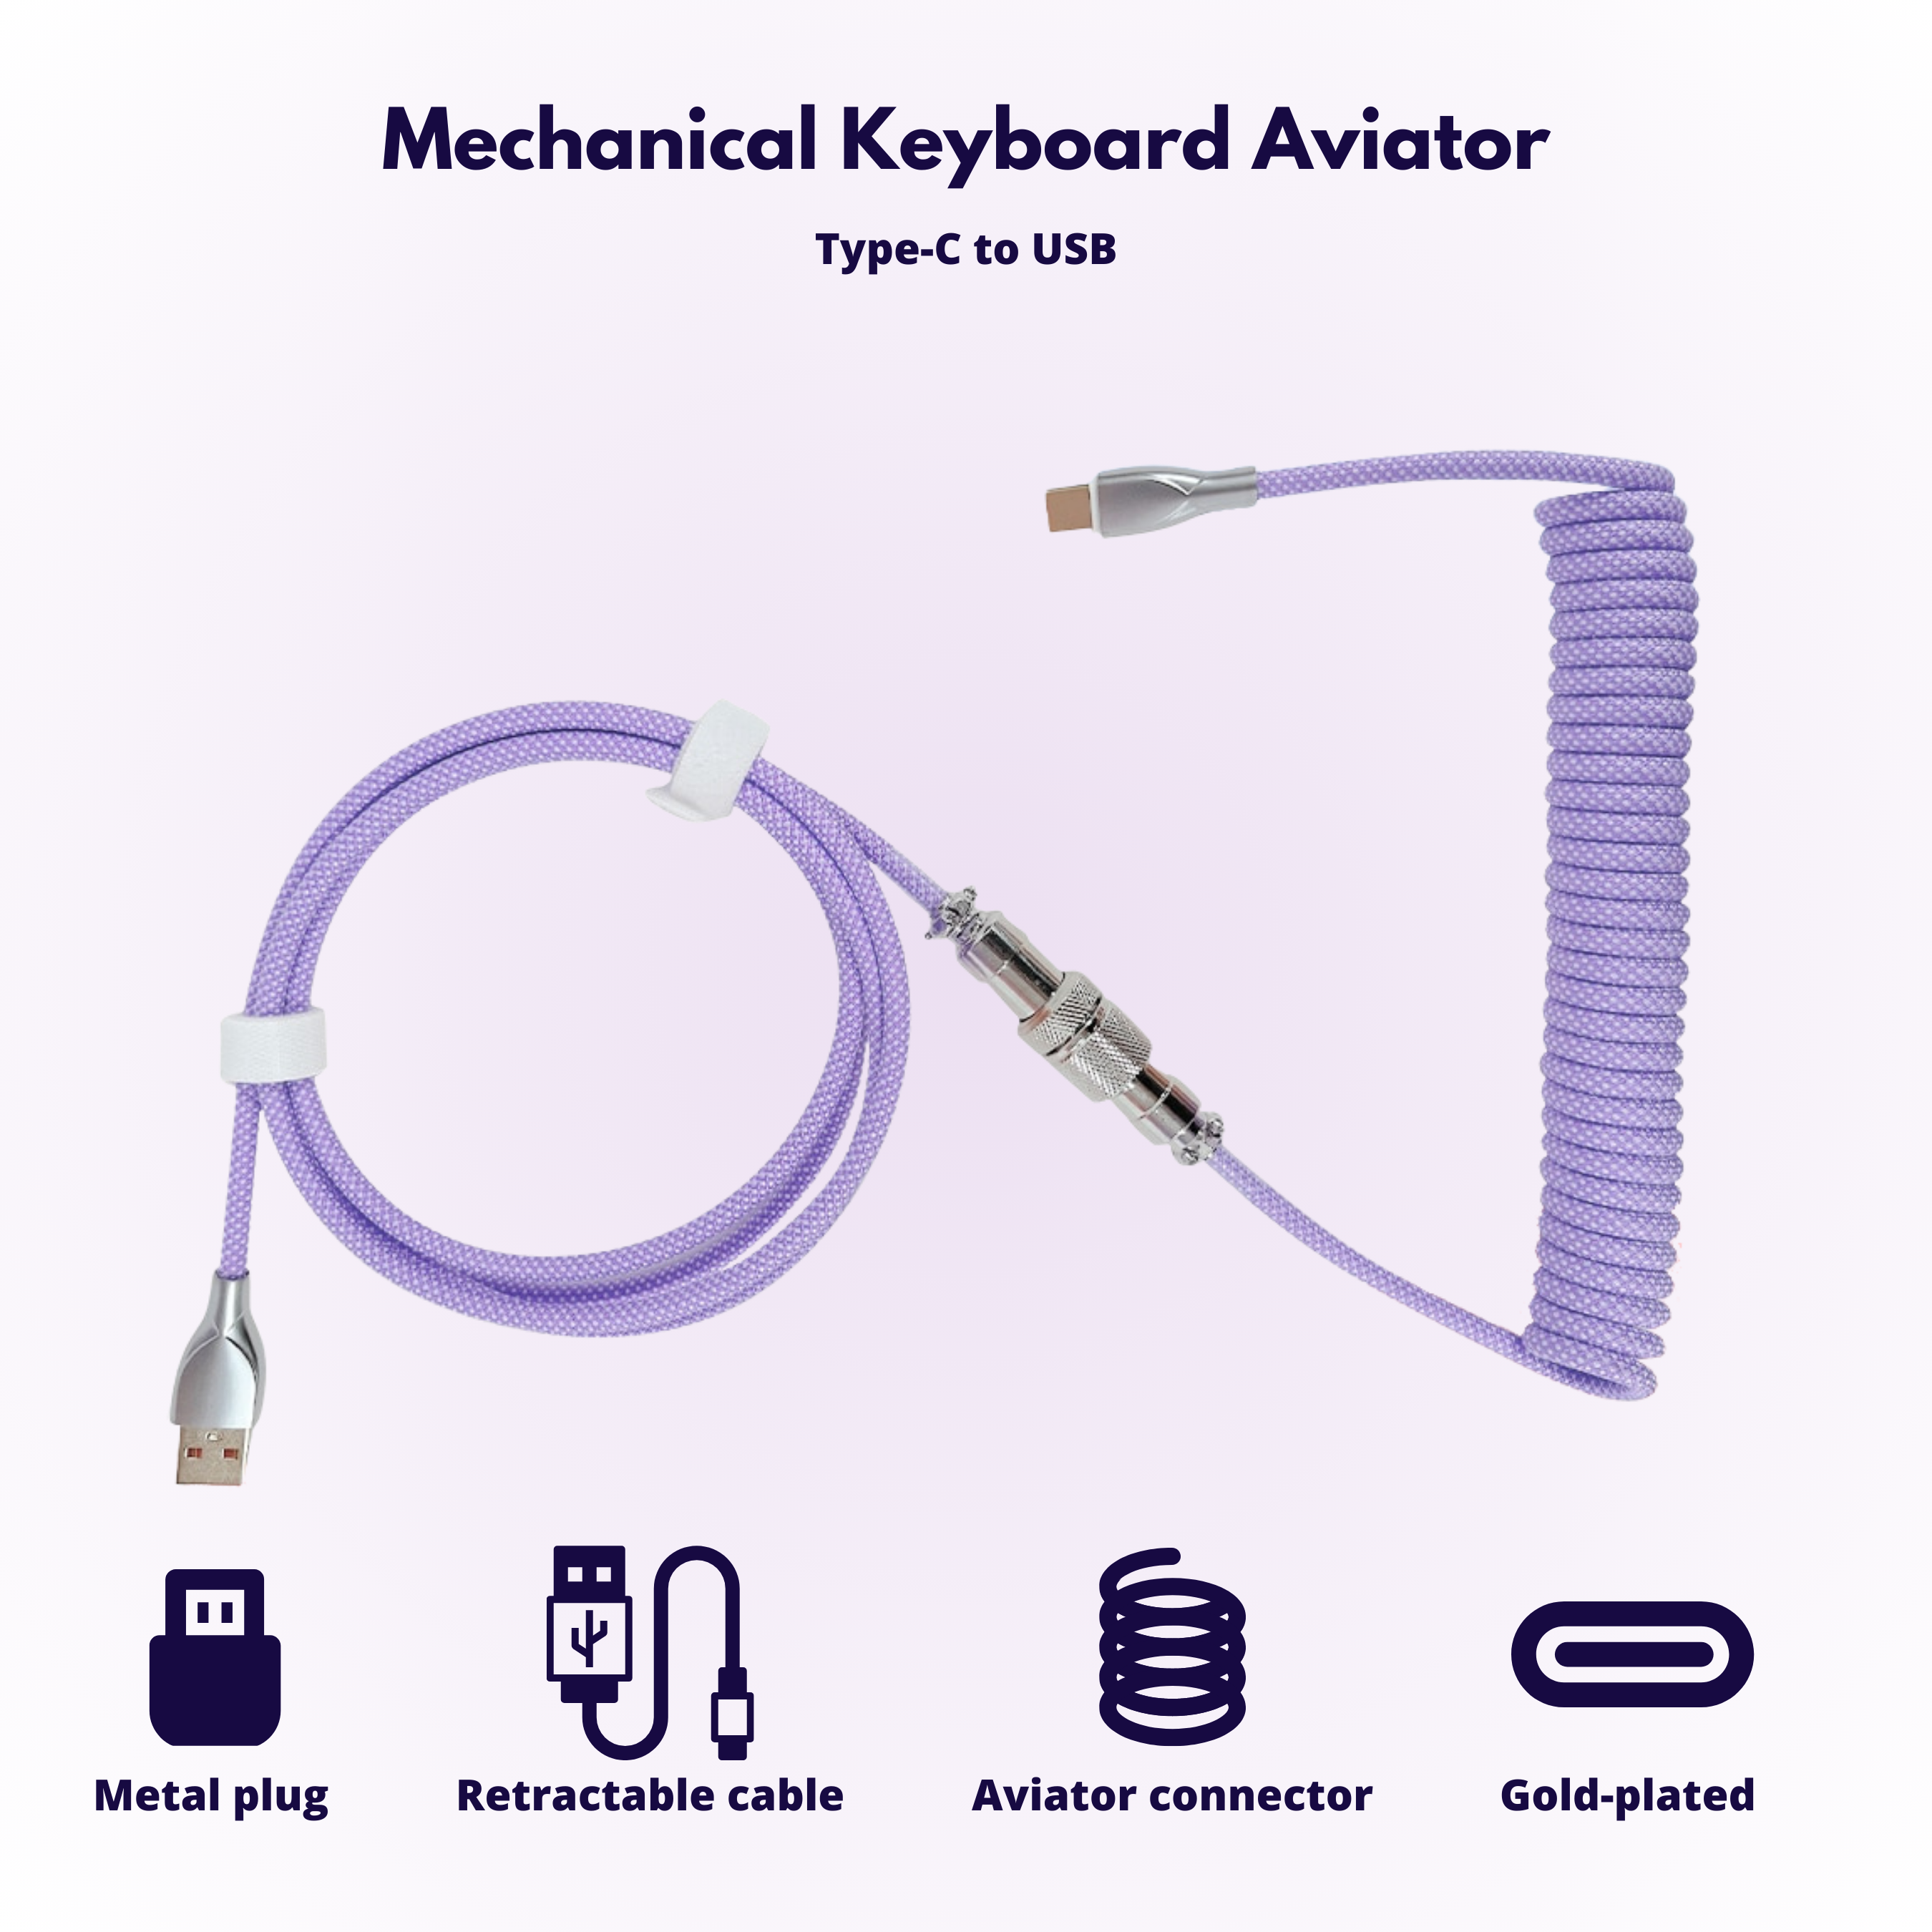 purple pastel mechanical keyboard coiled cable with information at the bottom. Stating it is a type-c adapter with metal plug, a retractable cable that is gold plated